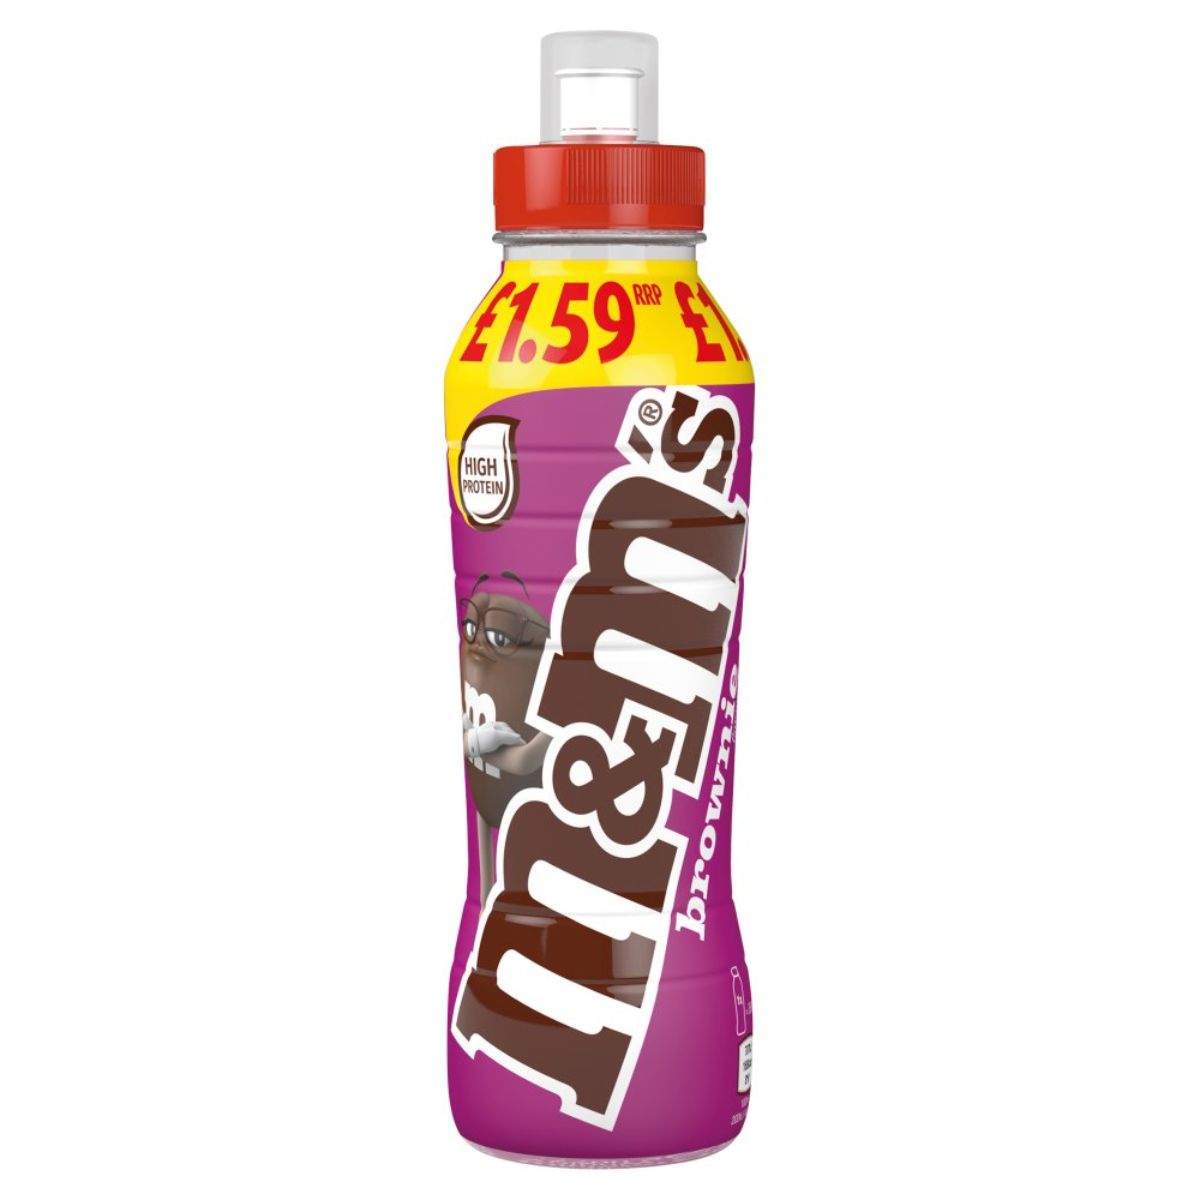 A M&Ms - Chocolate Brownie Milkshake Drink - 350ml with a red cap and a purple label.